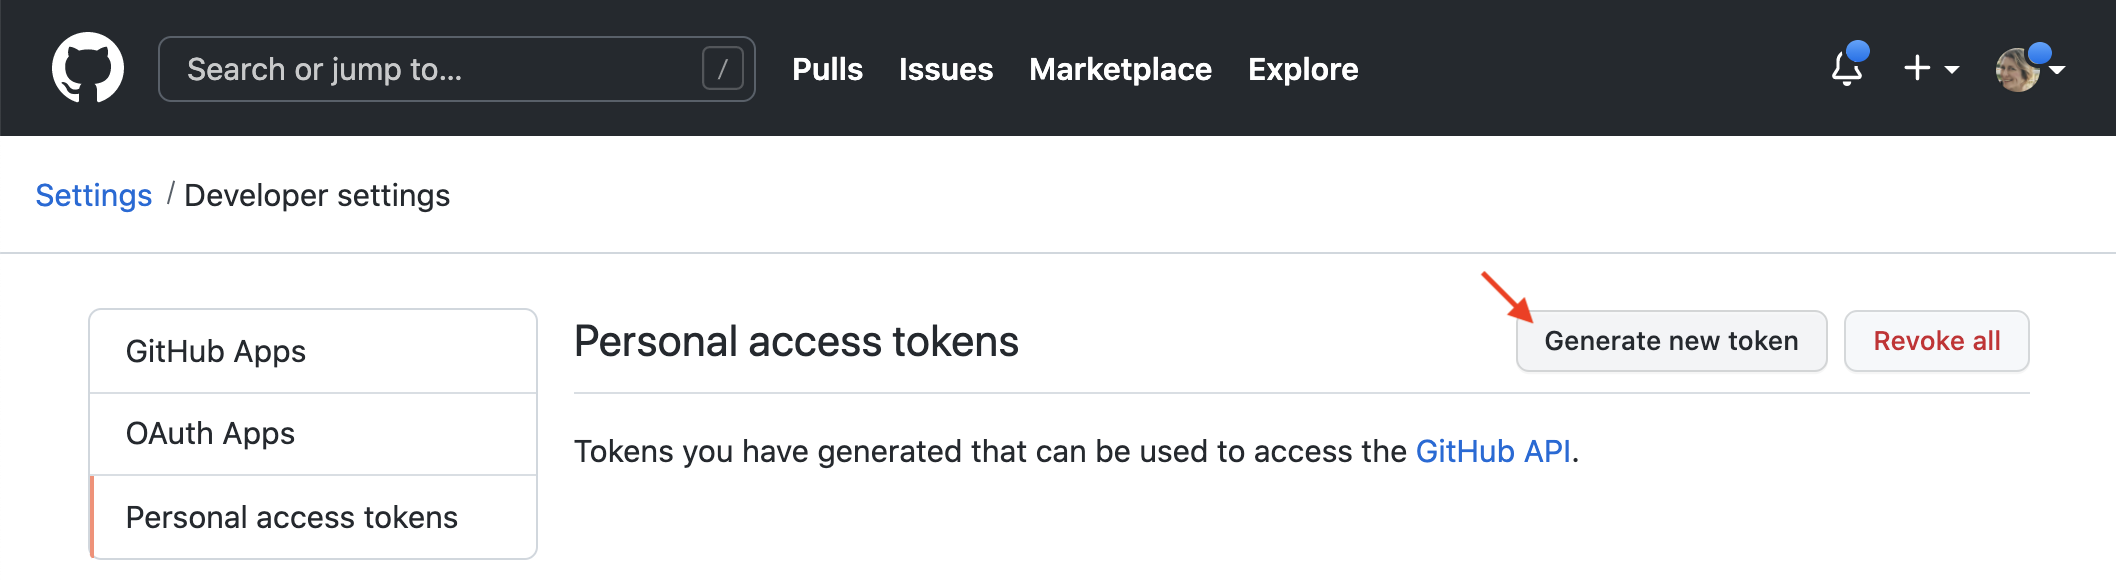 The “Generate new token” button used to initiate the creation of a new personal access token. It is found in the “Personal access tokens” section of the “Developer settings” page in your account settings.